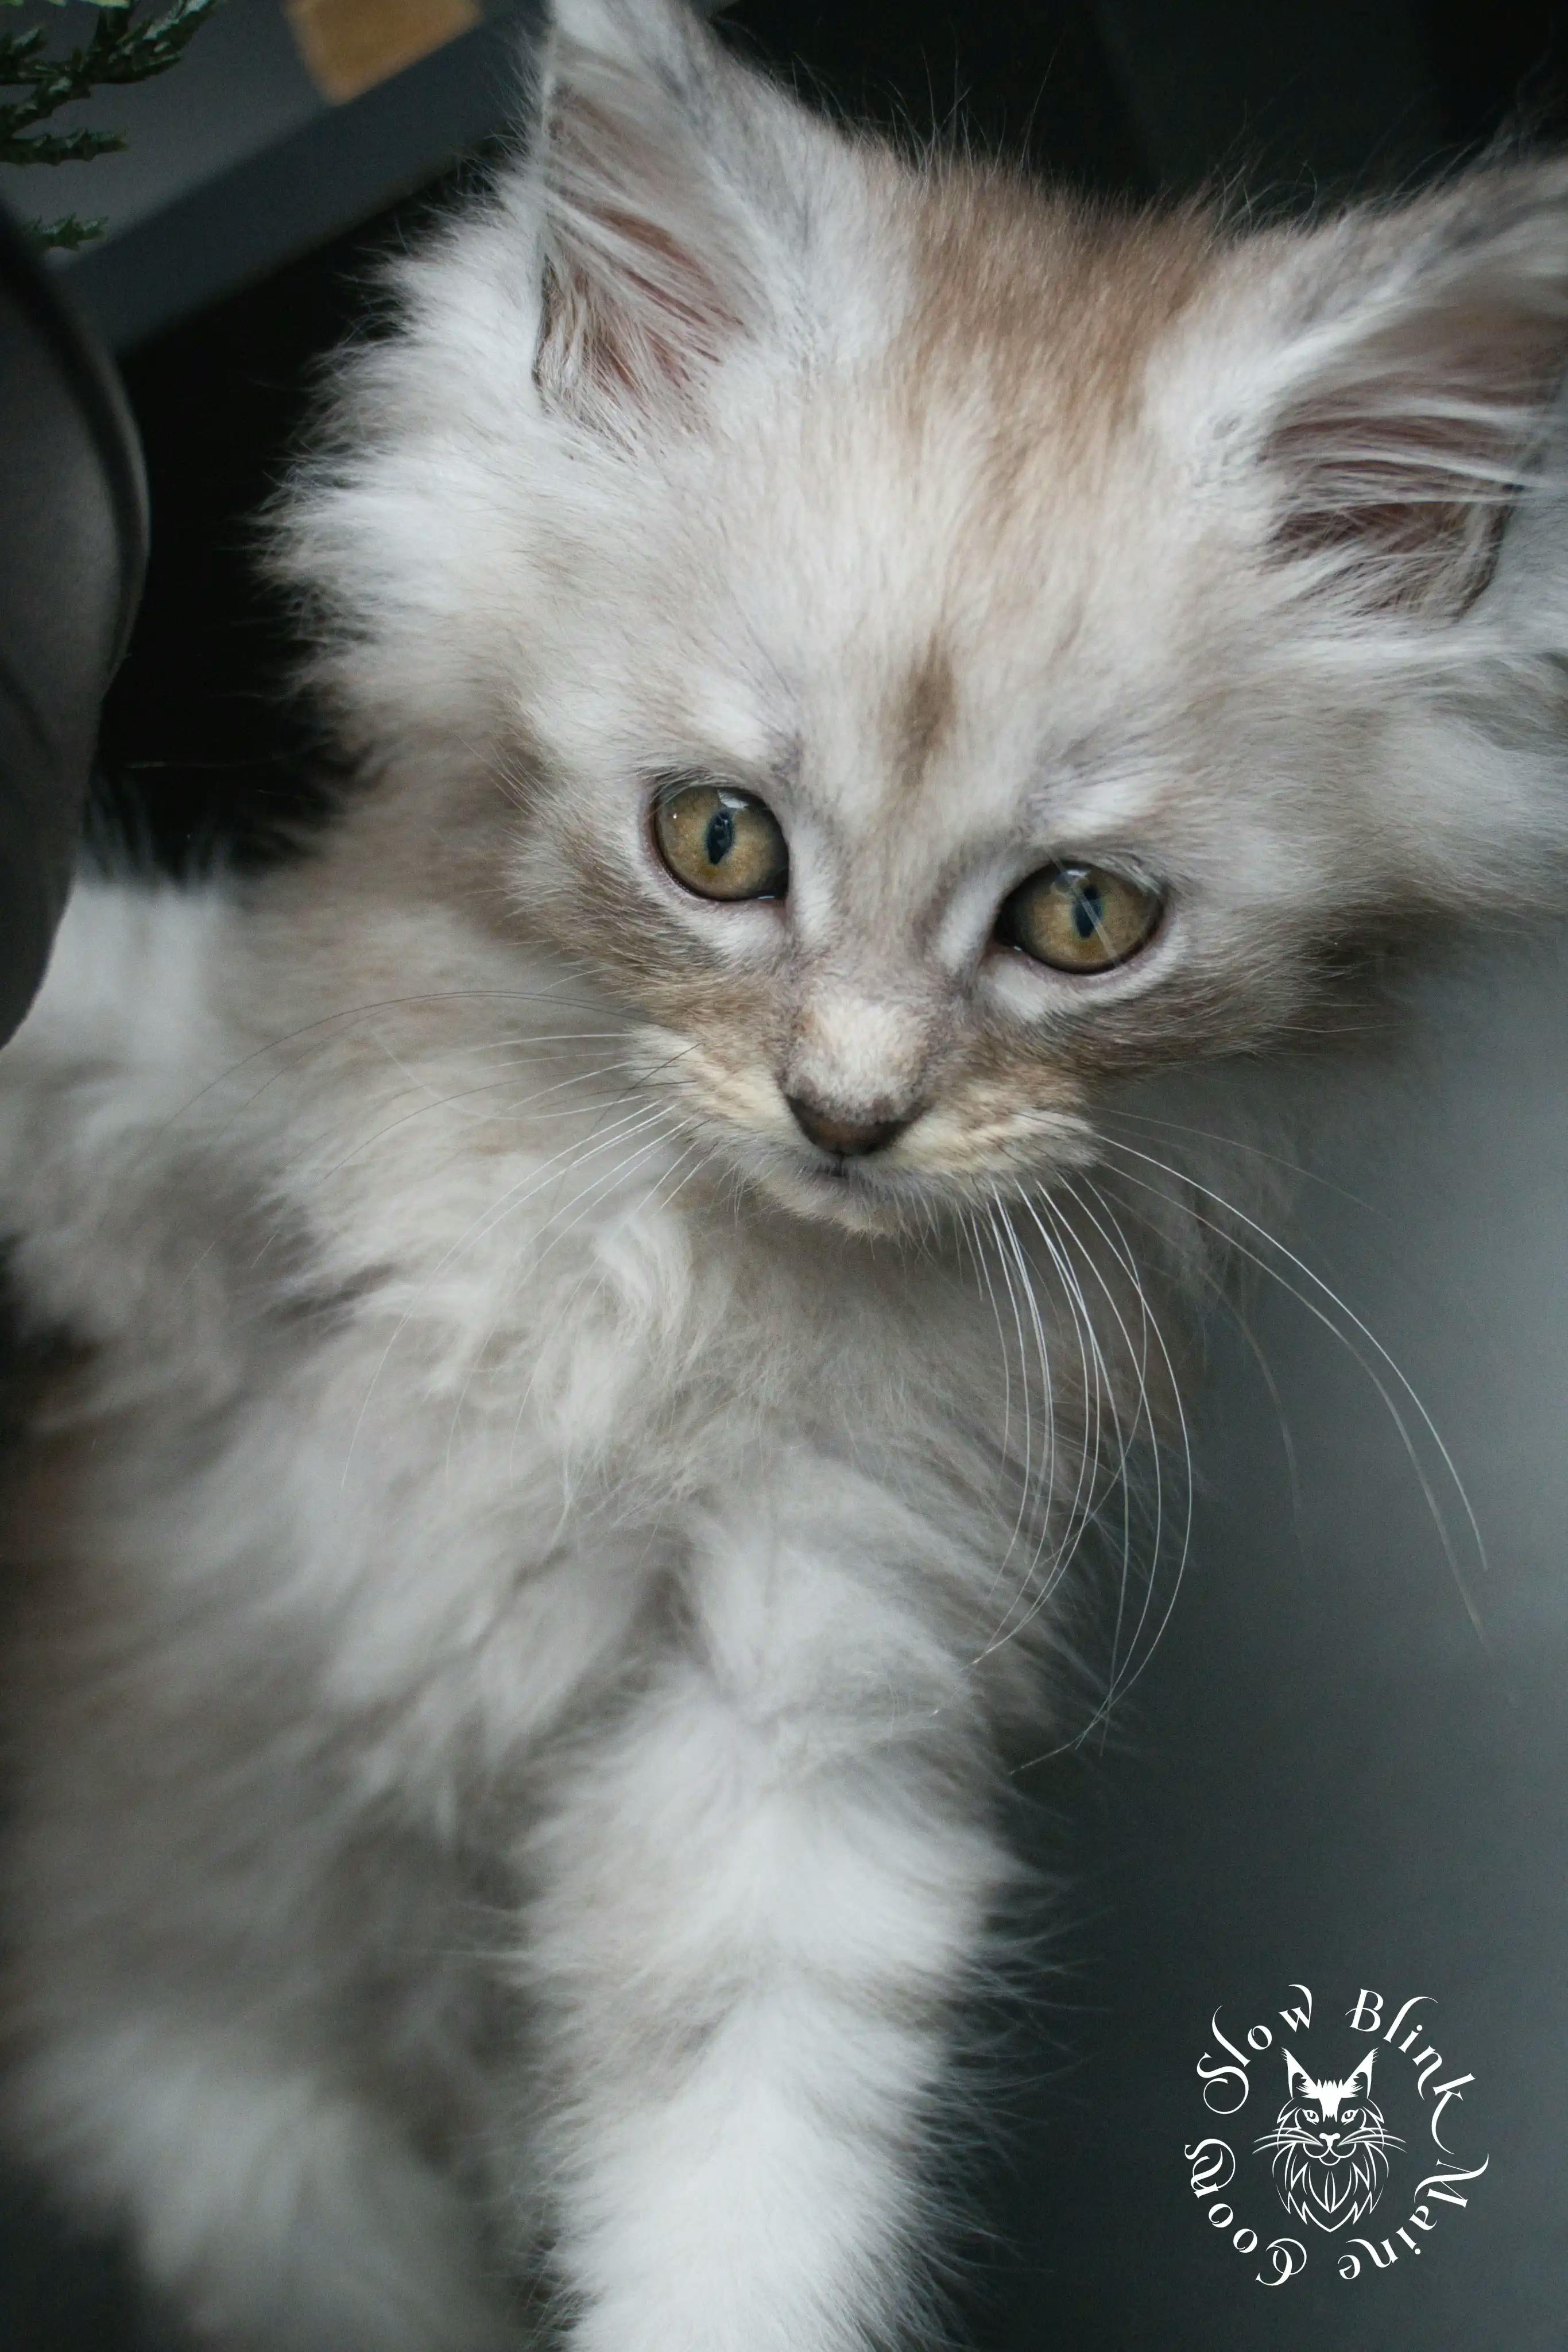 High Silver Maine Coon Kittens > black silver tabby maine coon kitten | ems code ns 22 23 24 25 | slowblinkmainecoons | 382